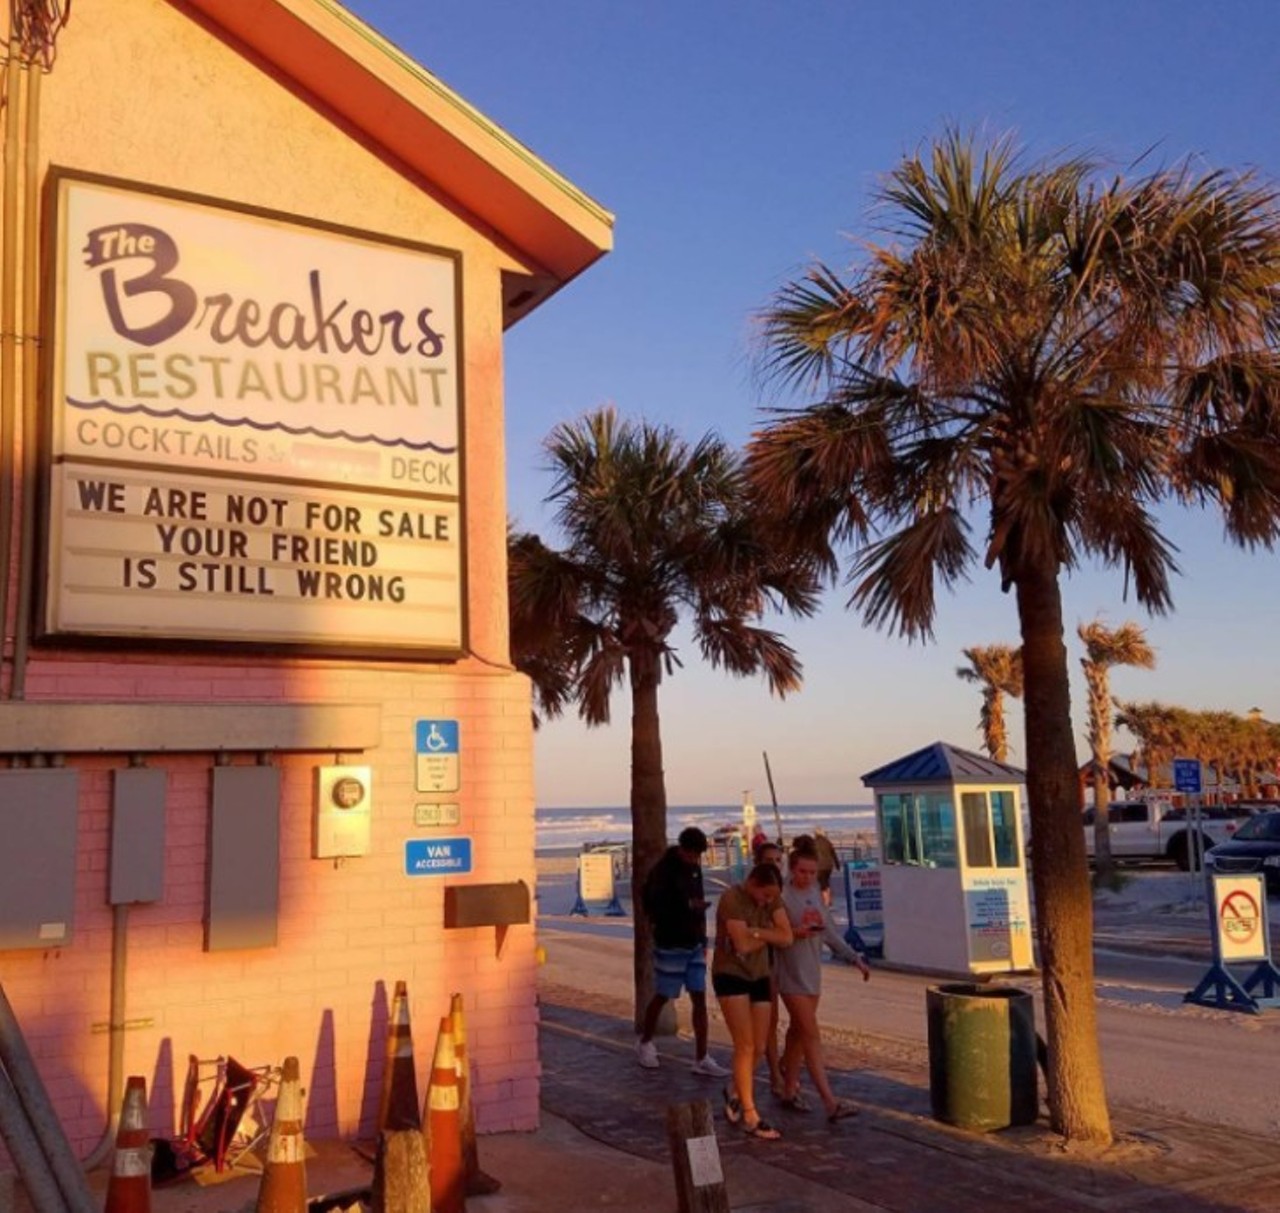 The Breakers Restaurant
518 Flagler Avenue, New Smyrna Beach, 32169 
If you can get a seat here, Breakers is one of the best spots in New Smyrna to grab a drink or some grub. Try one of their many burgers or their shrimp skewers. 
Photo via scott_murrish/Instagram